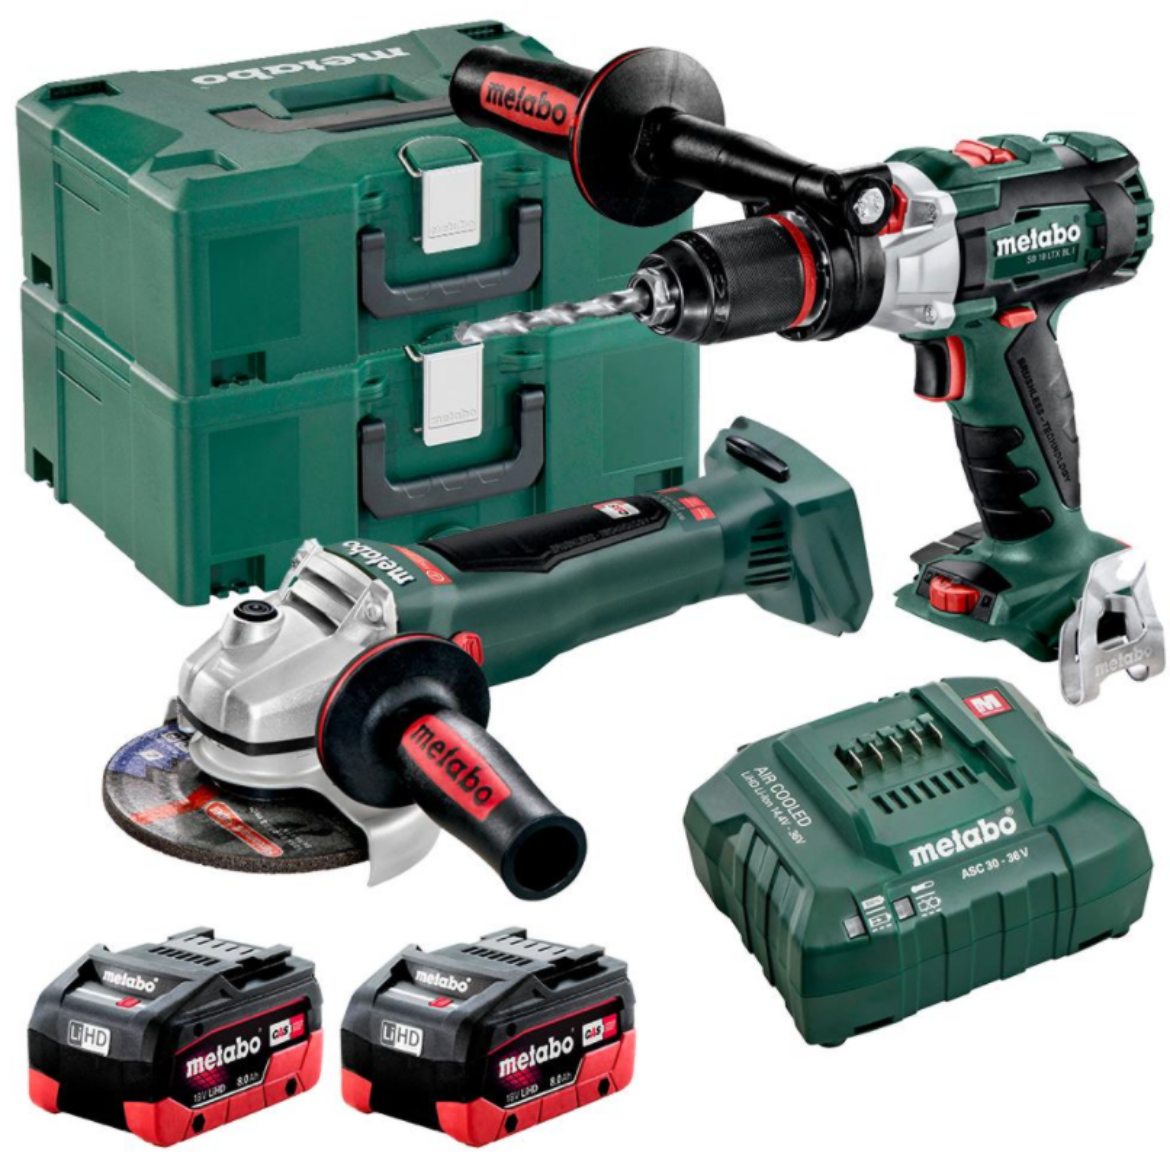 Picture of METABO 18V 8.0AH 2 PIECE KIT 120NM BRUSHLESS HAMMER DRILL + 125MM BRUSHLESS ANGLE GRINDER